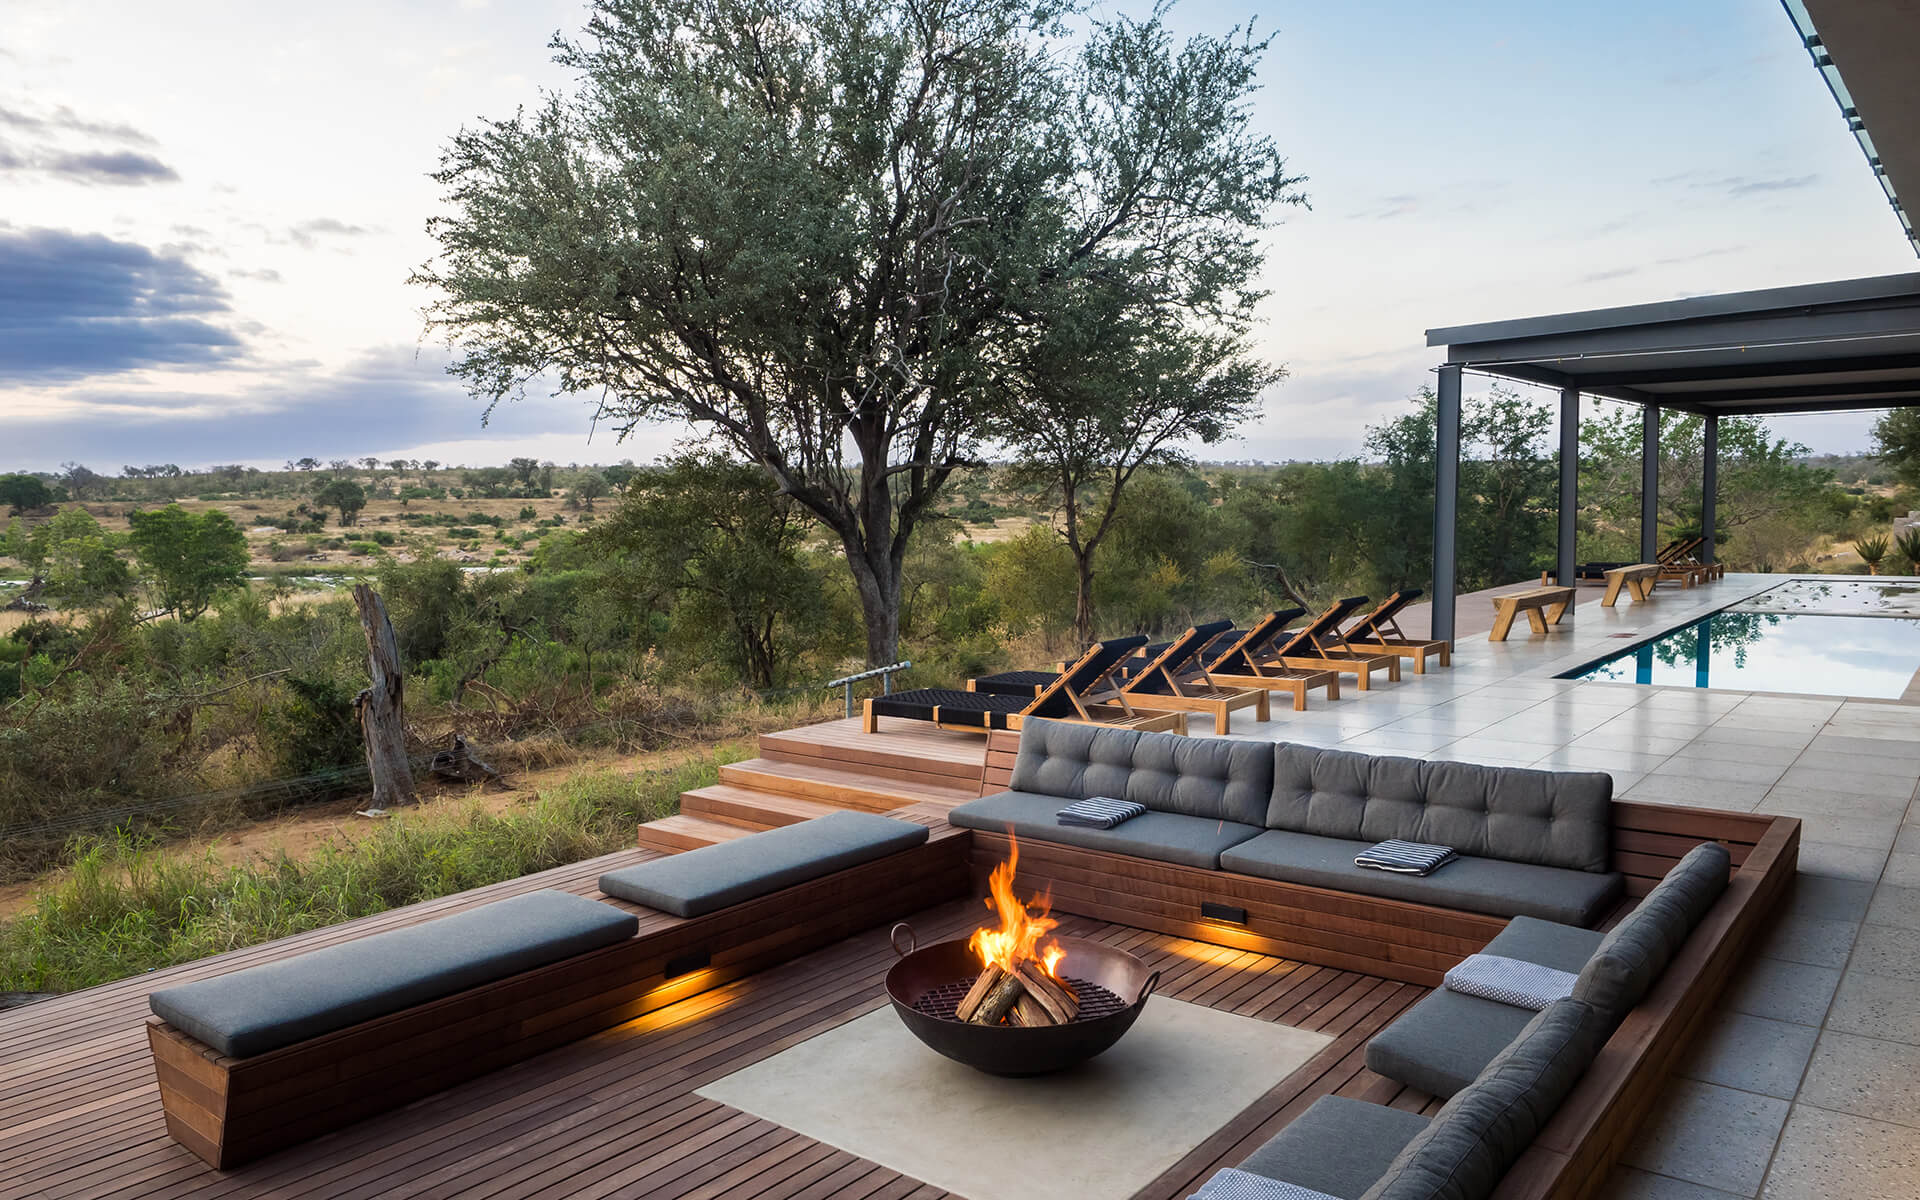 Bonfire with a view over the Kruger National Park